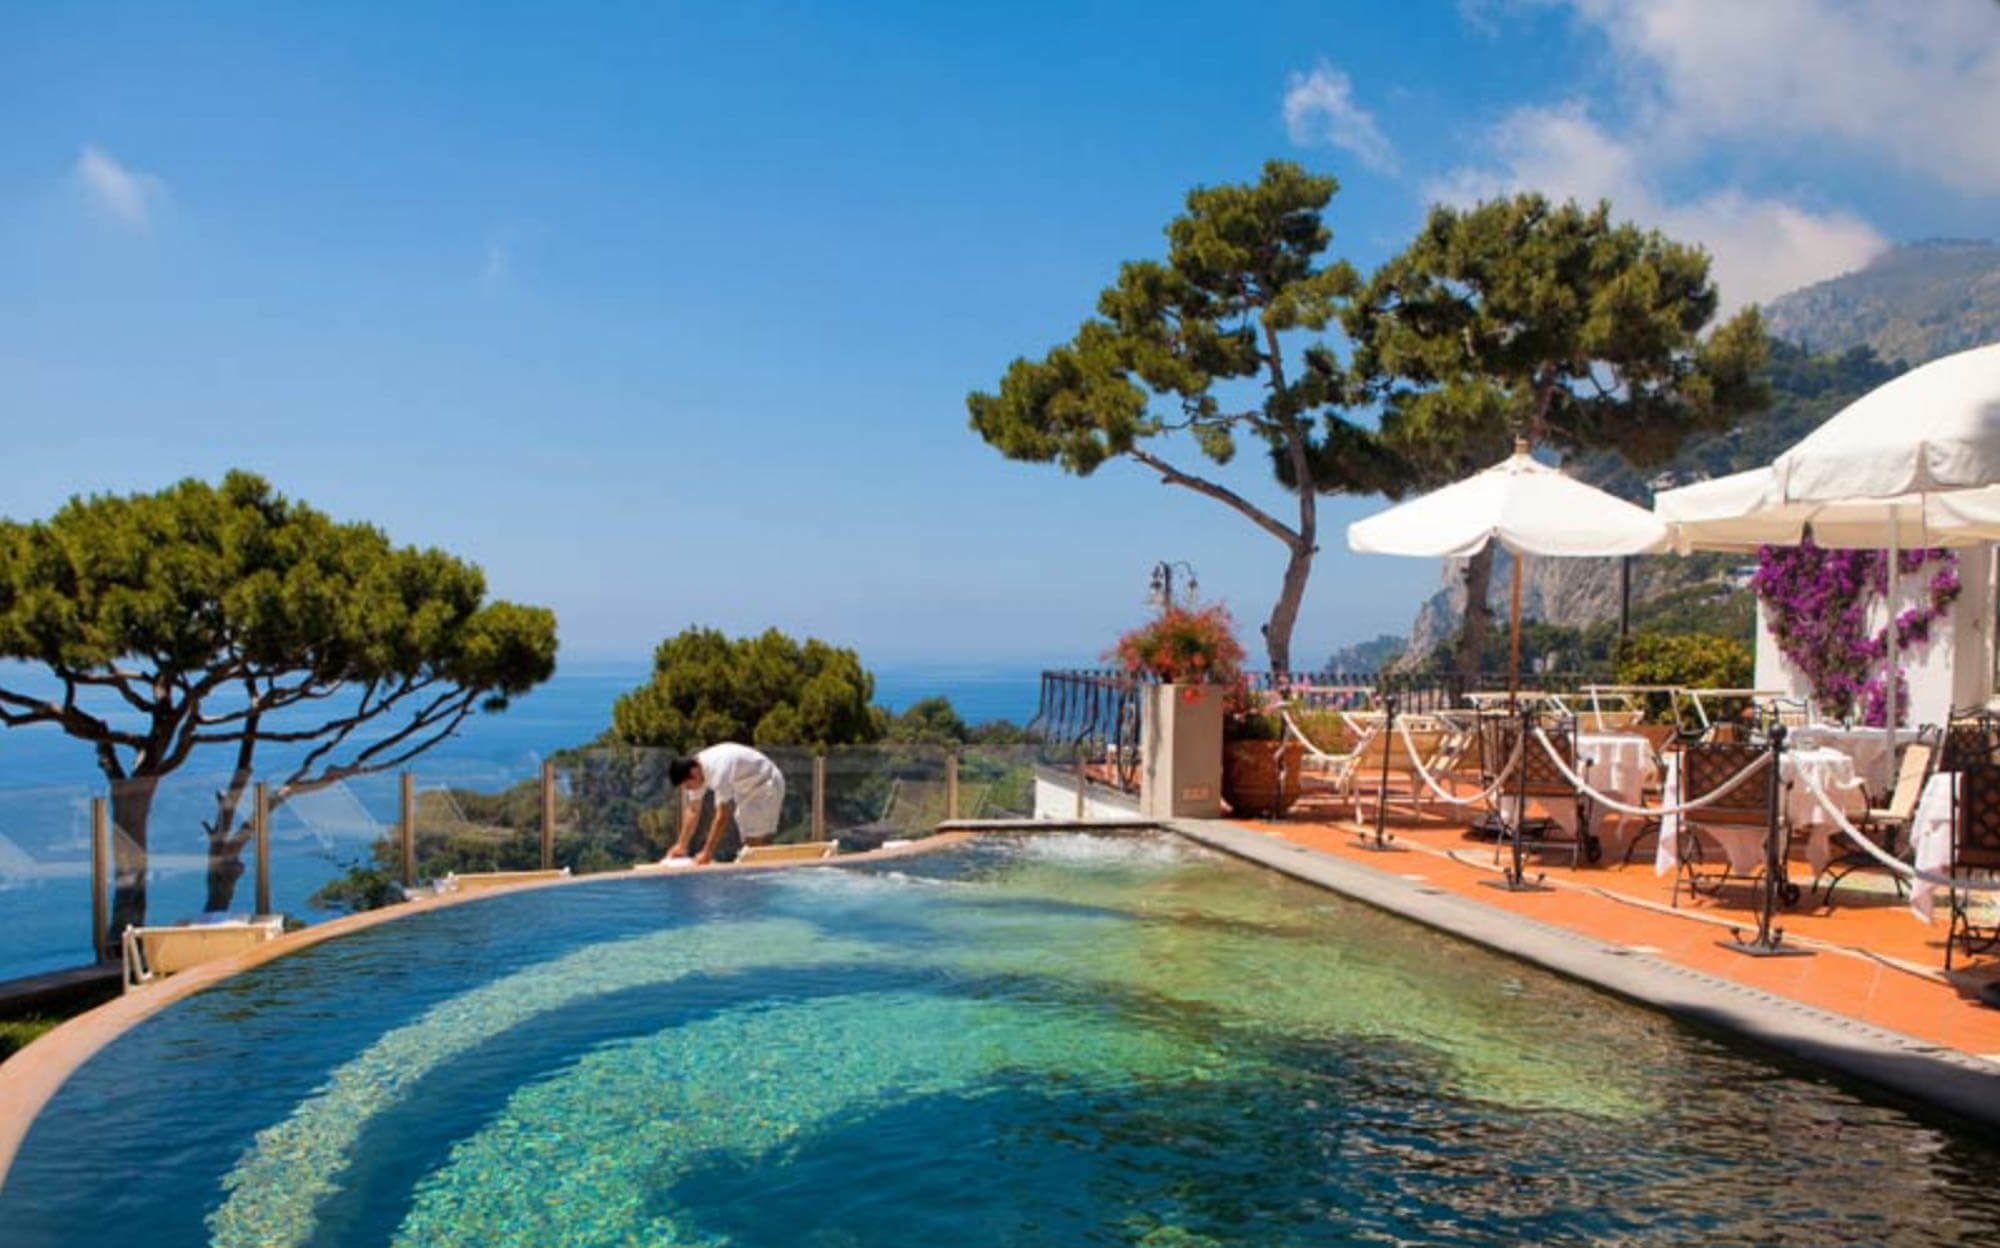 The infinity pool with sea views at Casa Morgano, one of the best luxury hotels in Capri